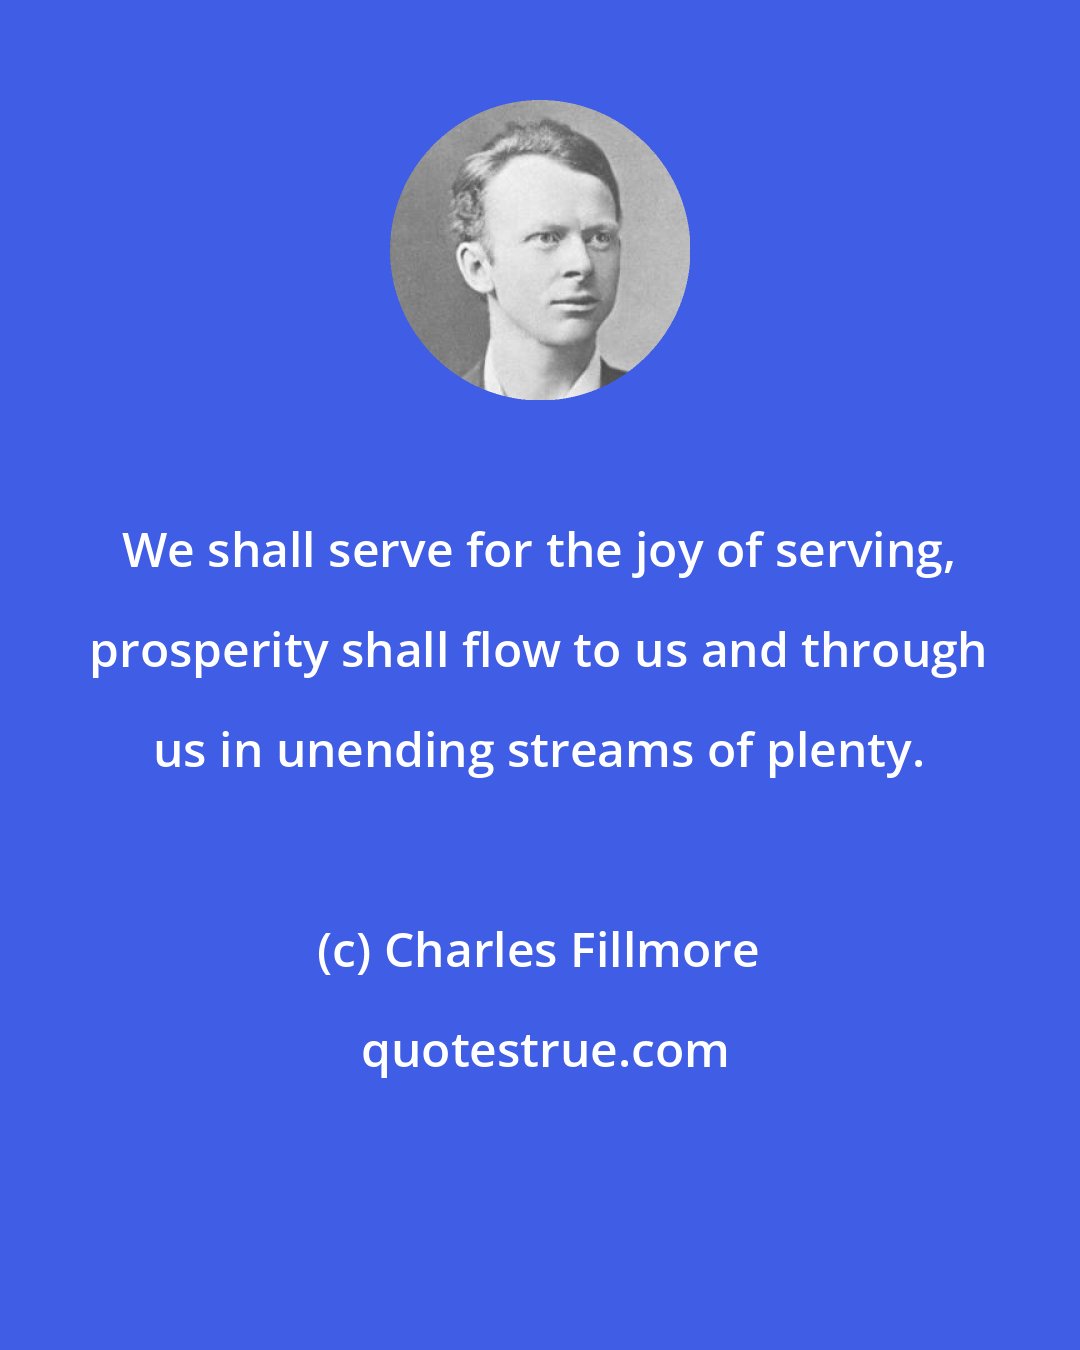 Charles Fillmore: We shall serve for the joy of serving, prosperity shall flow to us and through us in unending streams of plenty.